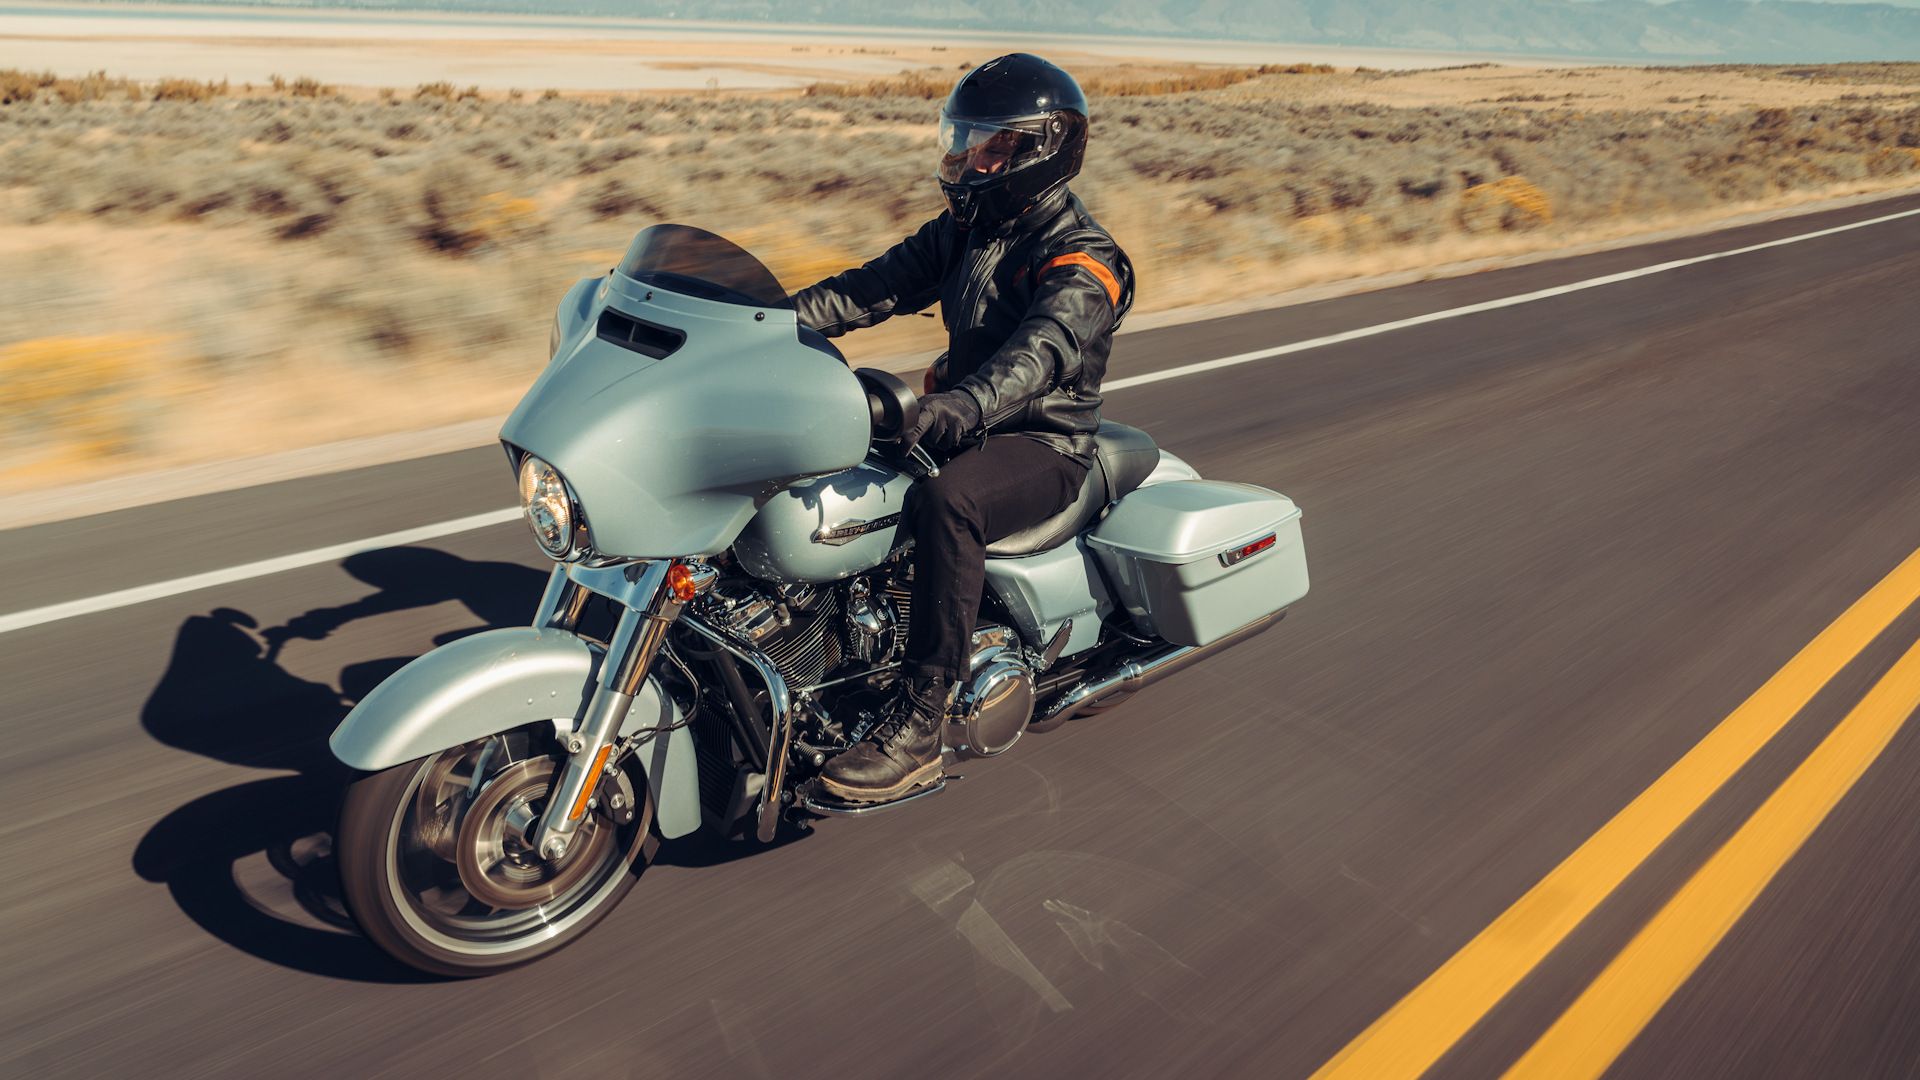 Silver 2023 Harley-Davidson Street Glide cruising up the road